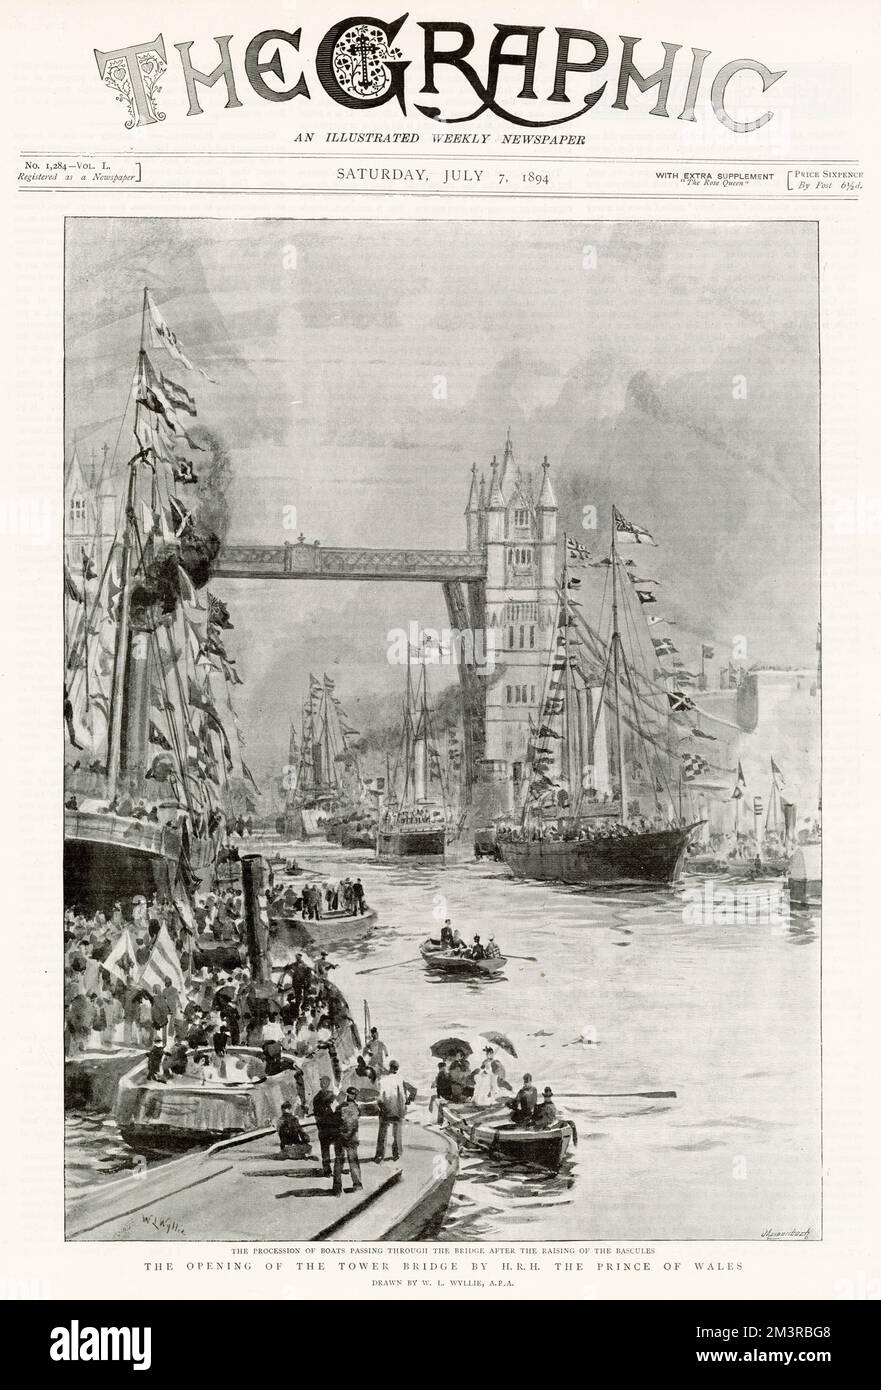 Procession of boats on the River Thames. Passing through the bridge after the raising of the bascules, opened by Prince and Princess of Wales (later Edward VII and Alexandra of Denmark), on behalf of Queen Victoria. Stock Photo